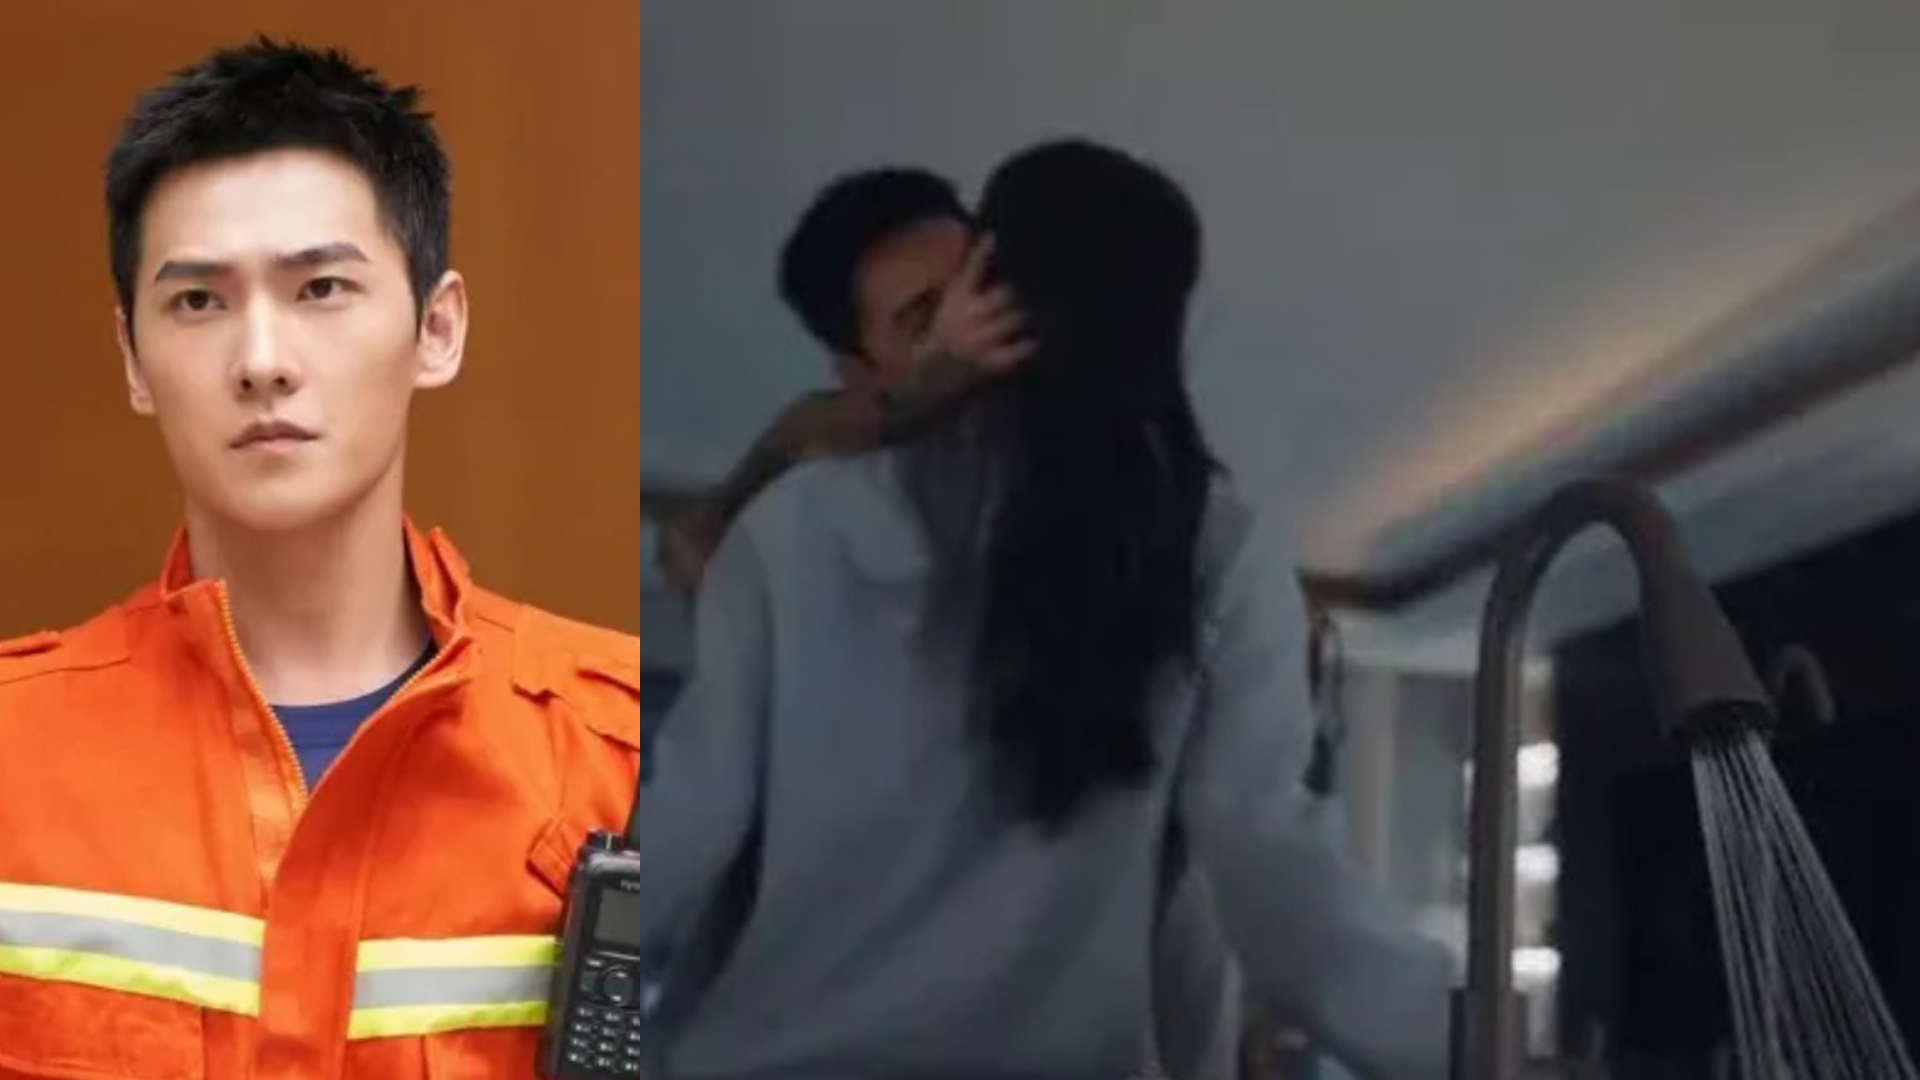 Yang Yangs Make Out Scene In New Drama Shows Tap Running At Full Blast, Viewers Awash With Anger